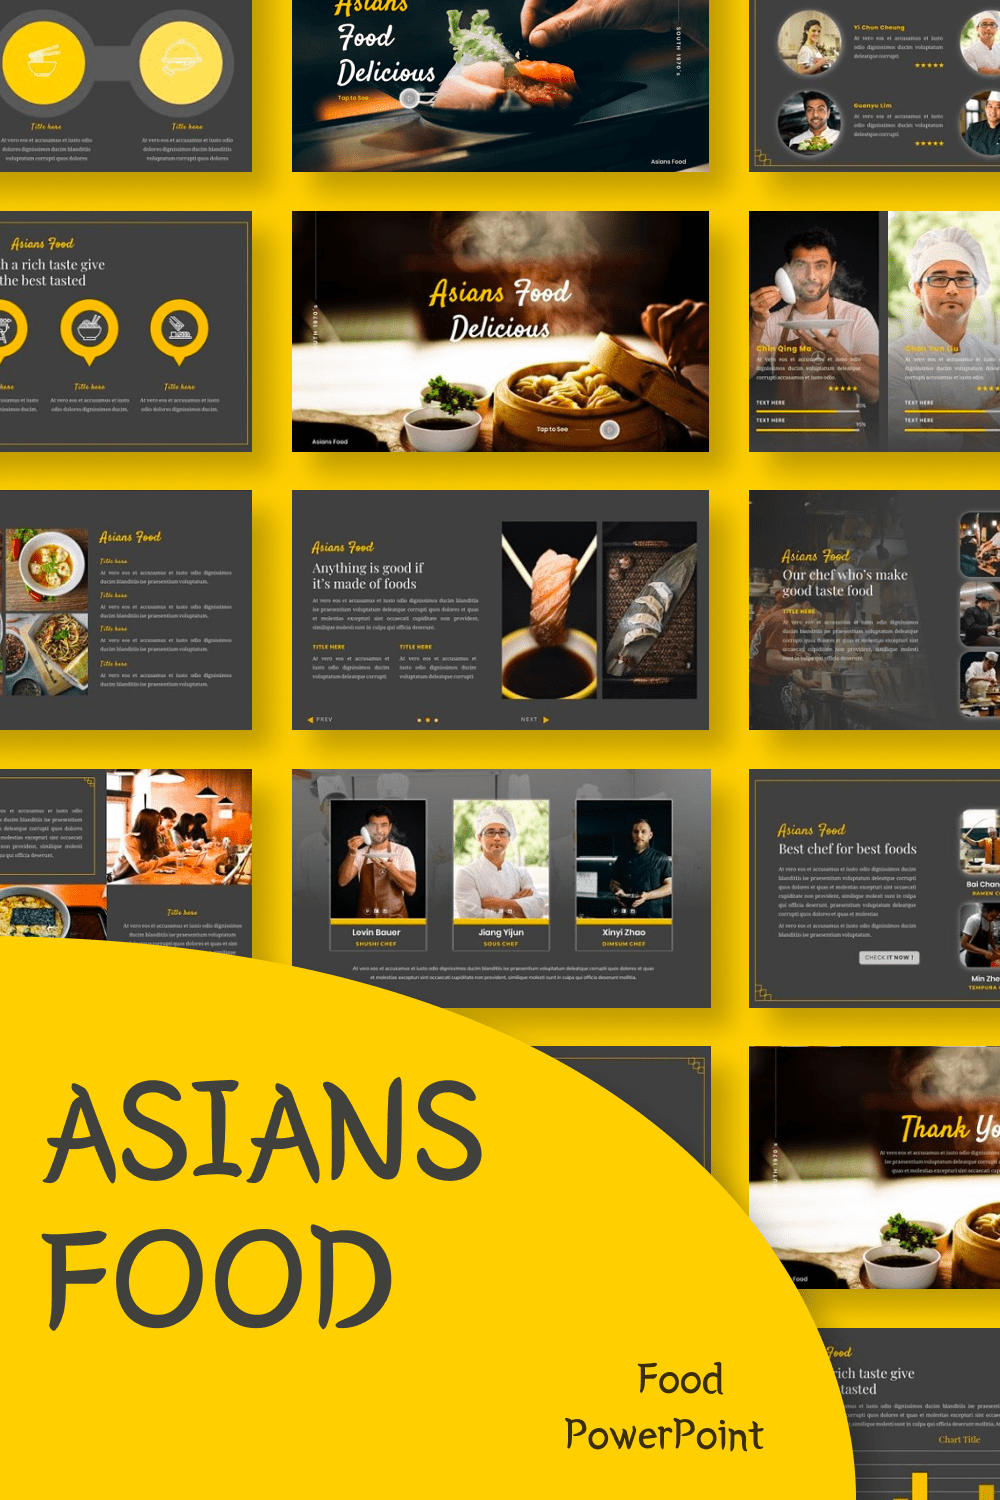 Asians Food - Food PowerPoint by MasterBundles Pinterest Collage Image.